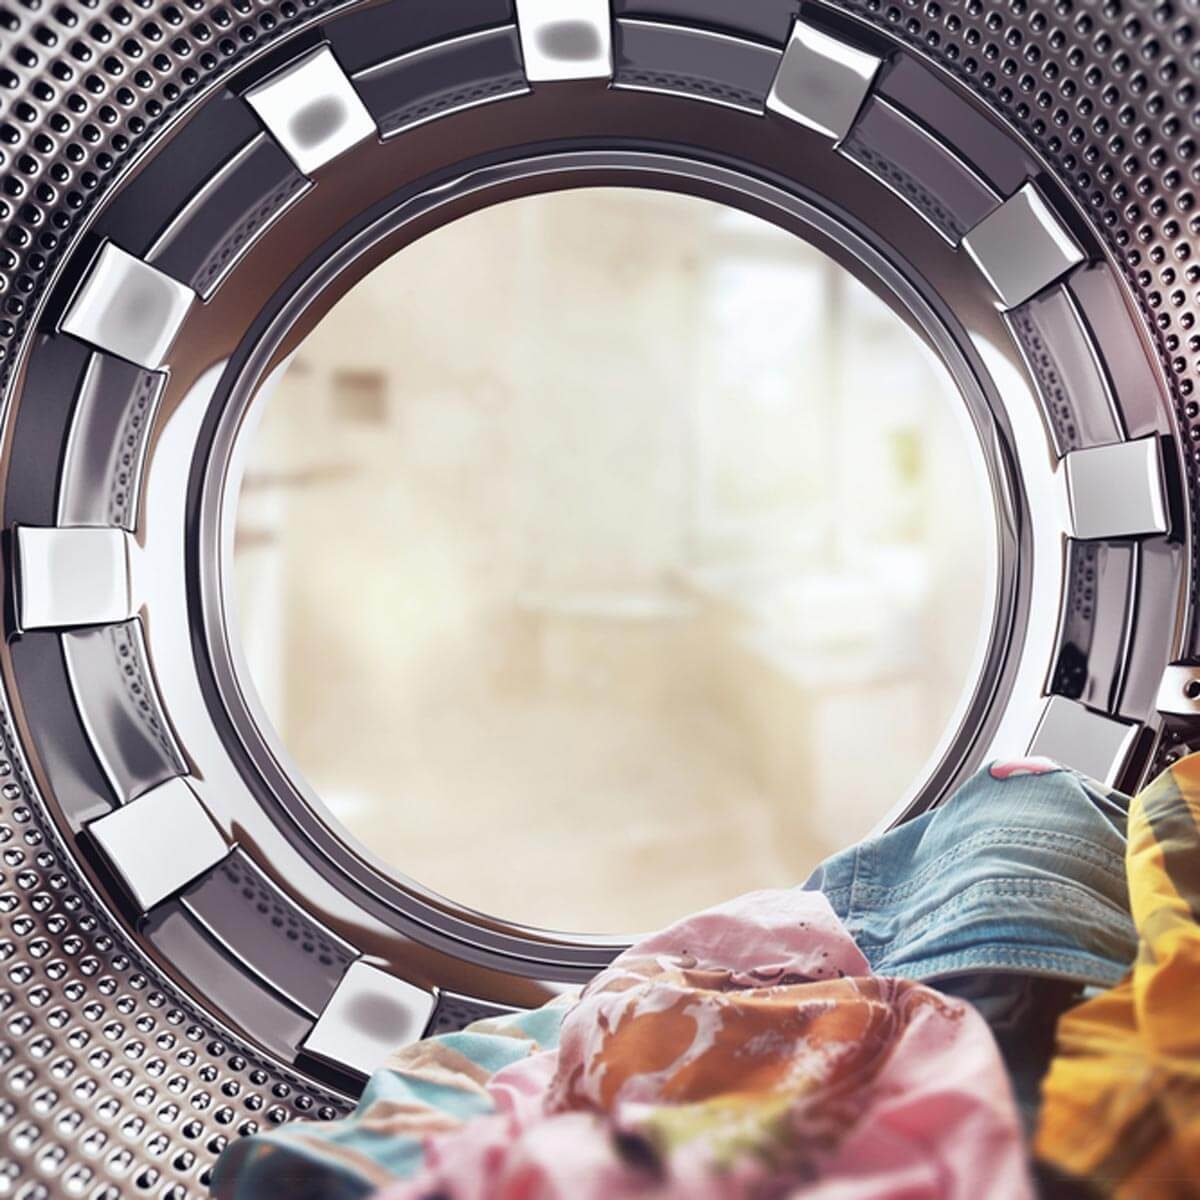 11 Things That Should Never, Ever End Up in Your Washing Machine